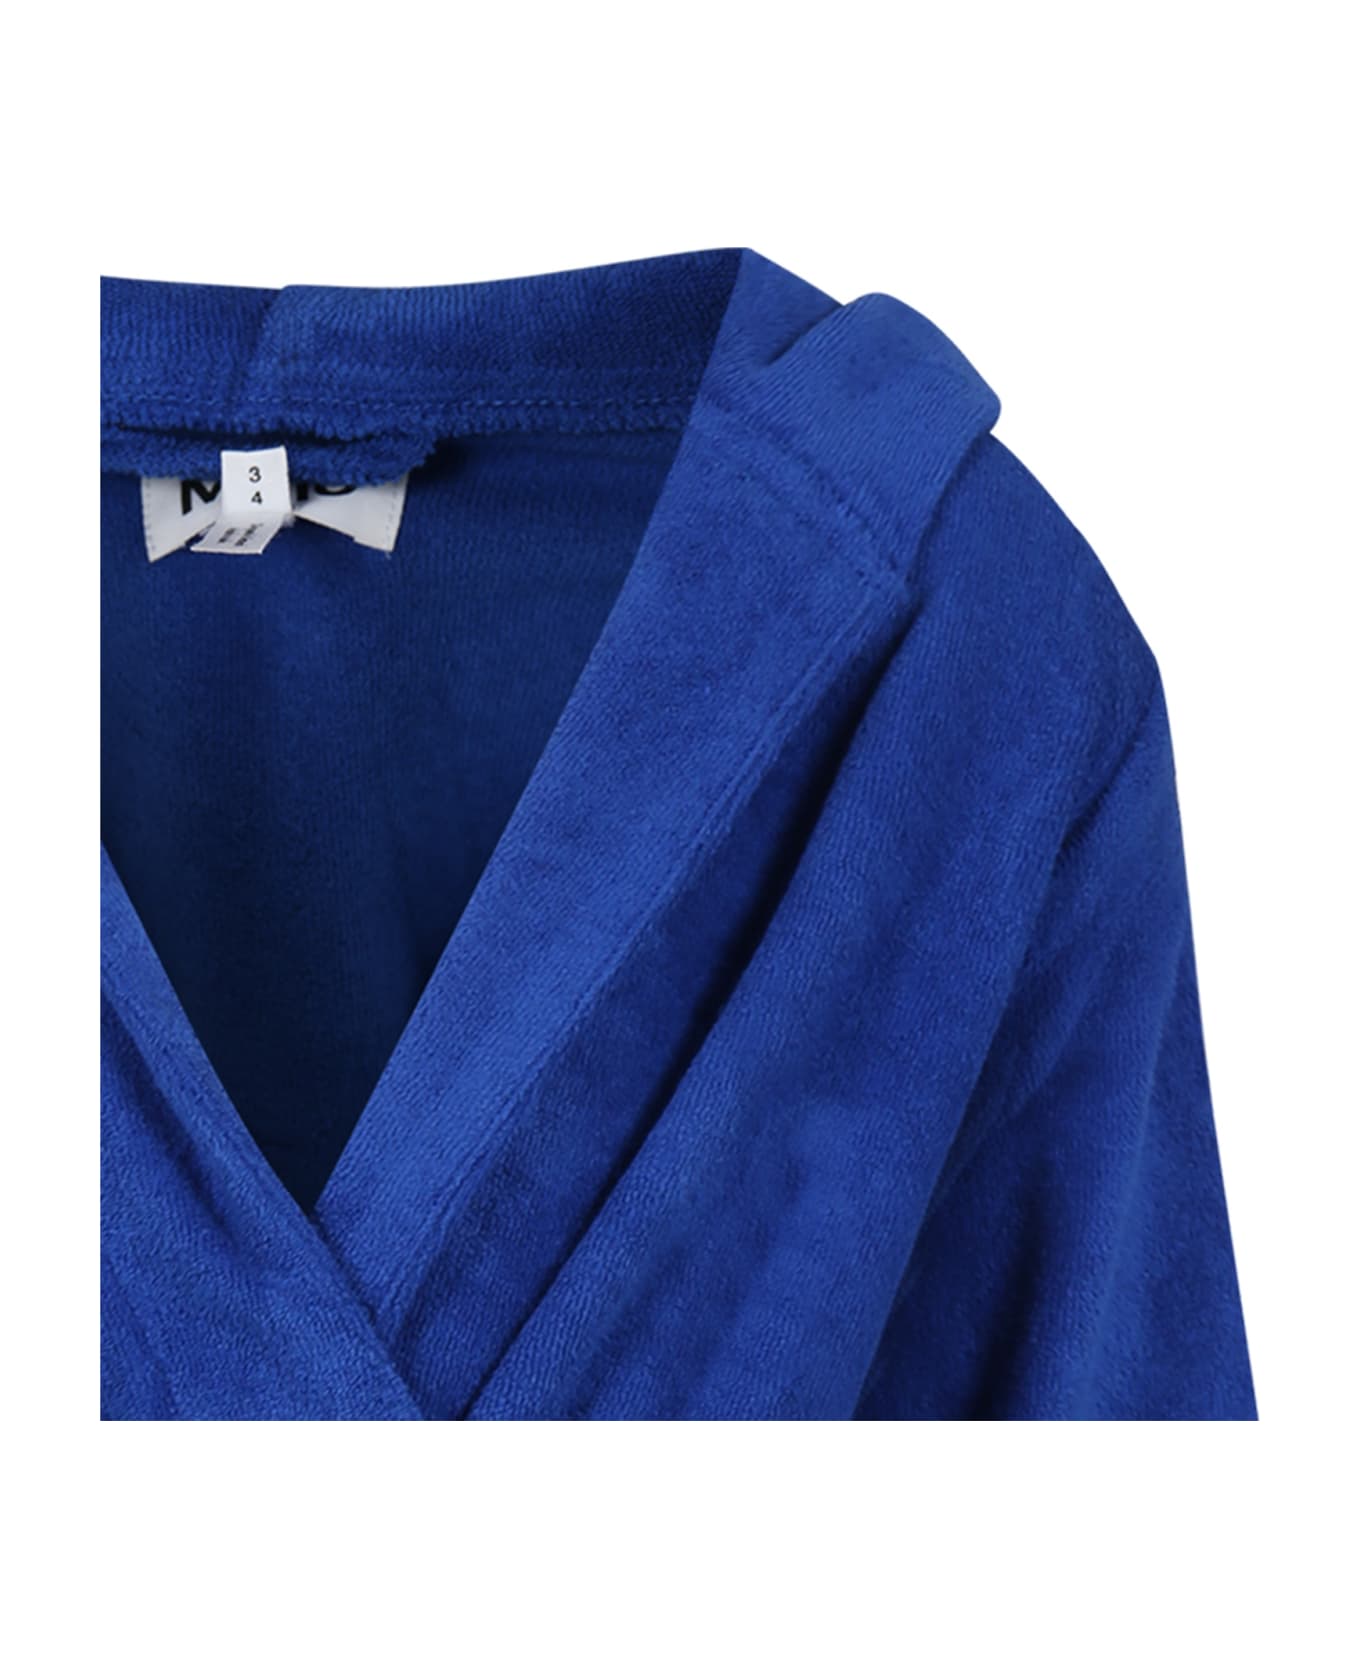 Molo Blue Dressing Gown For Kids - Blue ジャンプスーツ